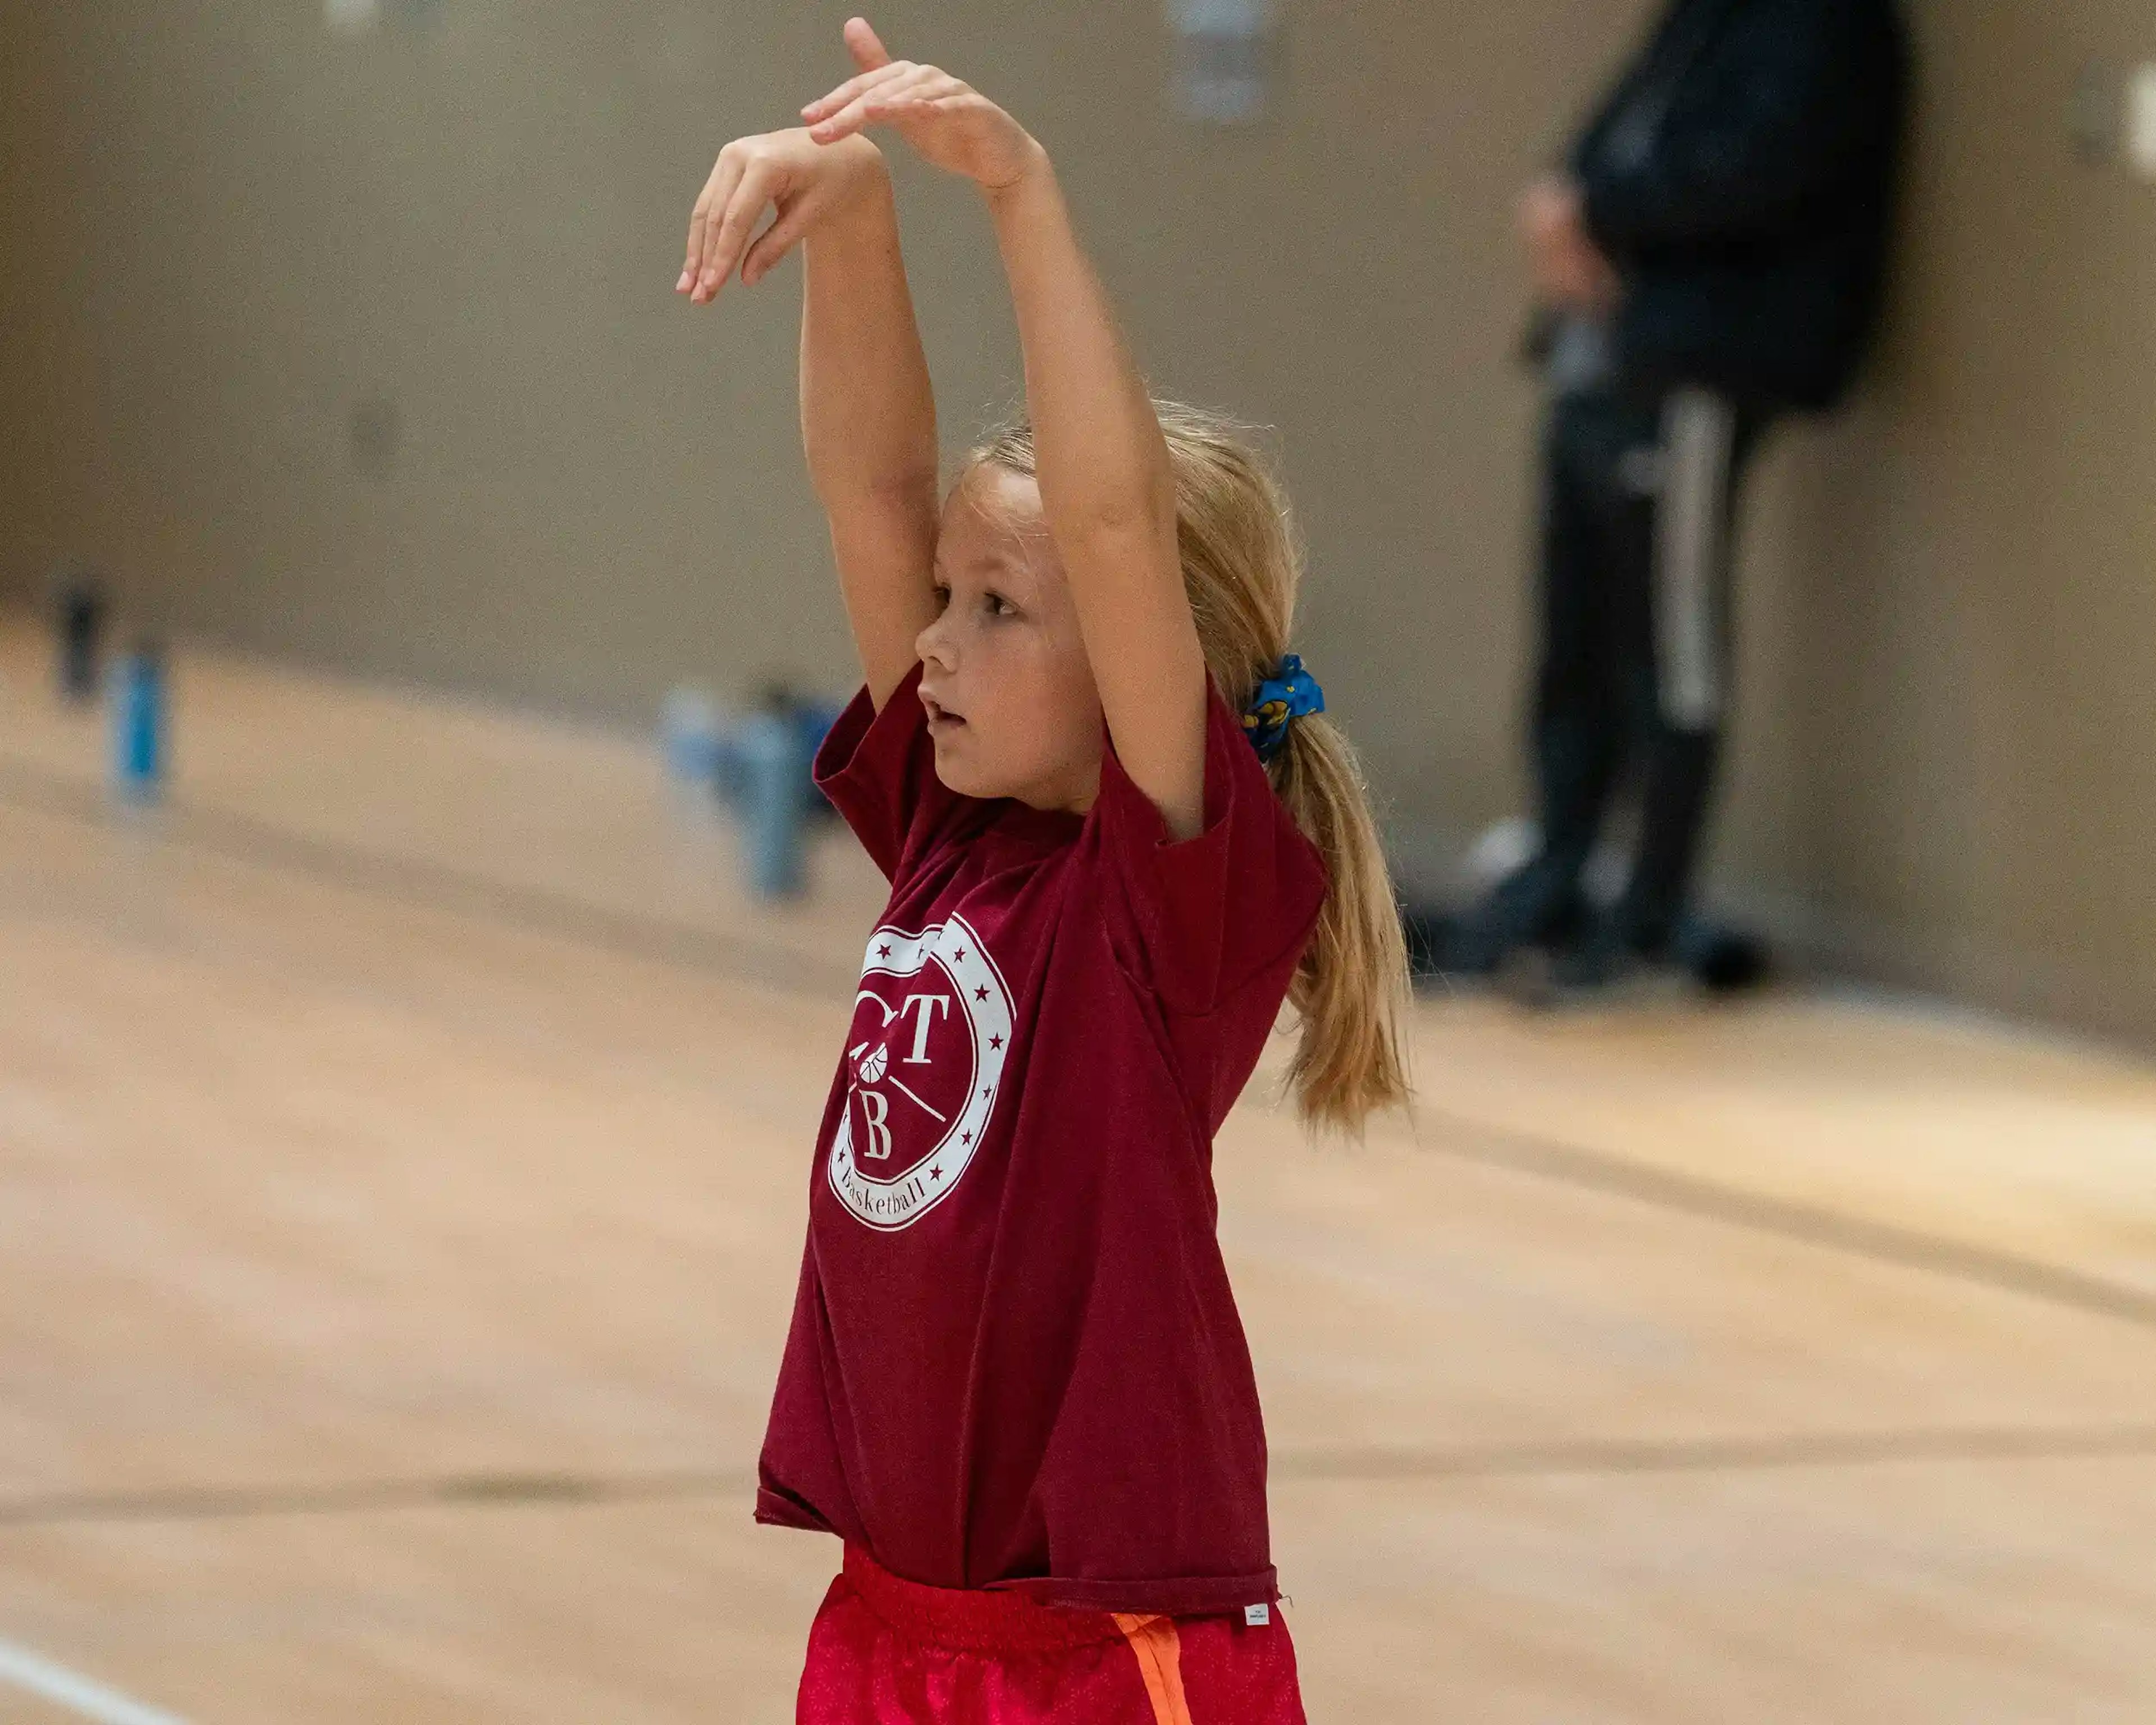 A young girl learning basketball shooting form